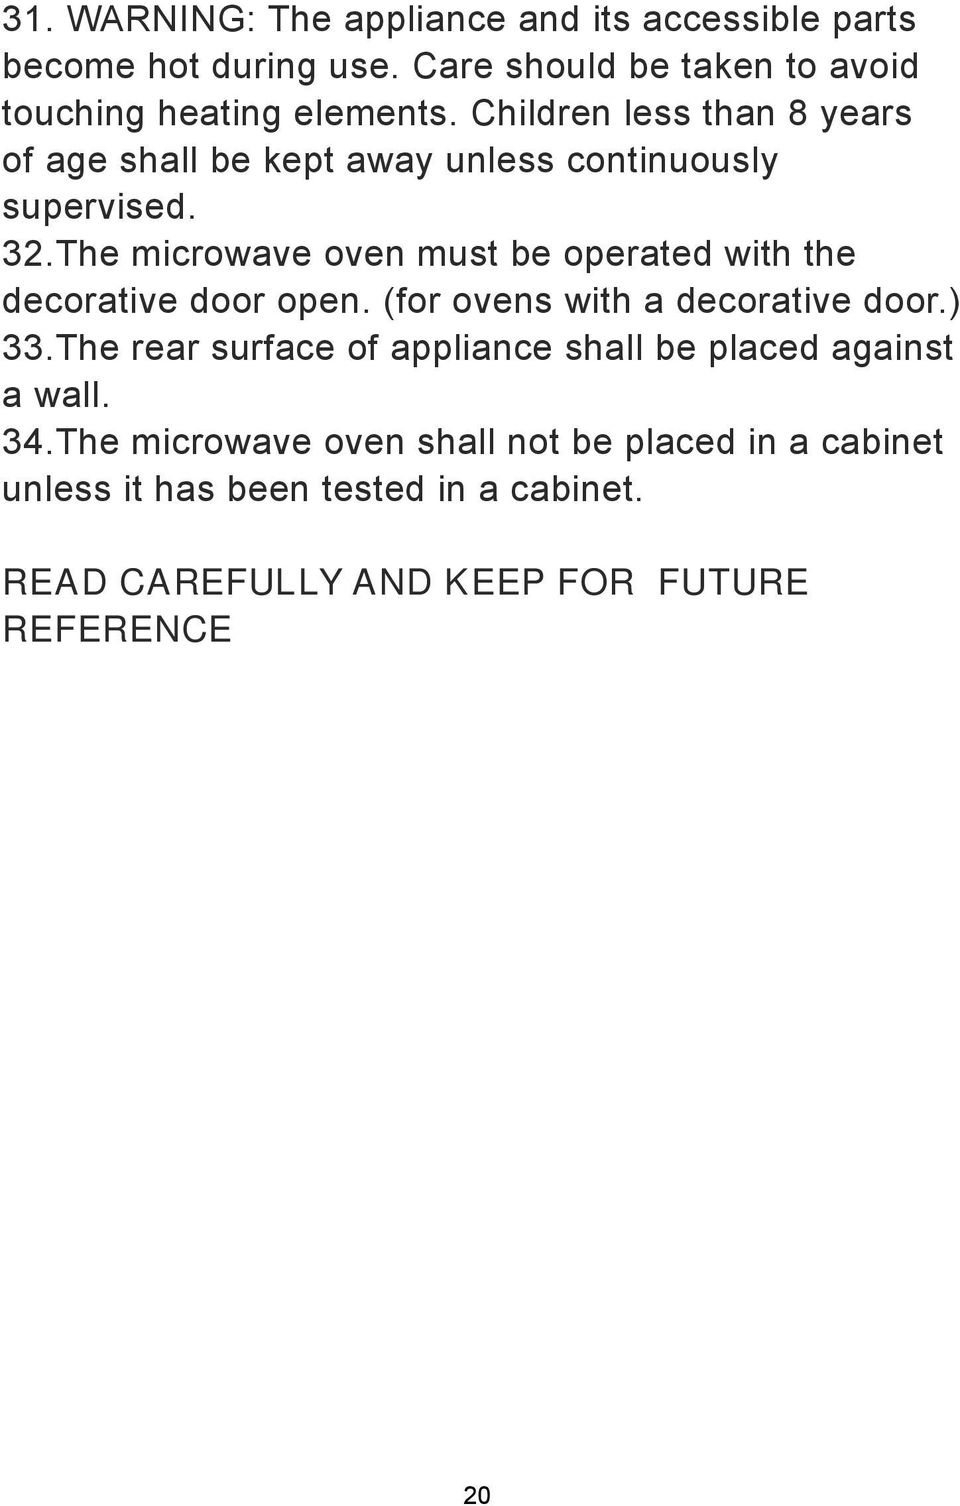 The microwave oven must be operated with the decorative door open. (for ovens with a decorative door.) 33.